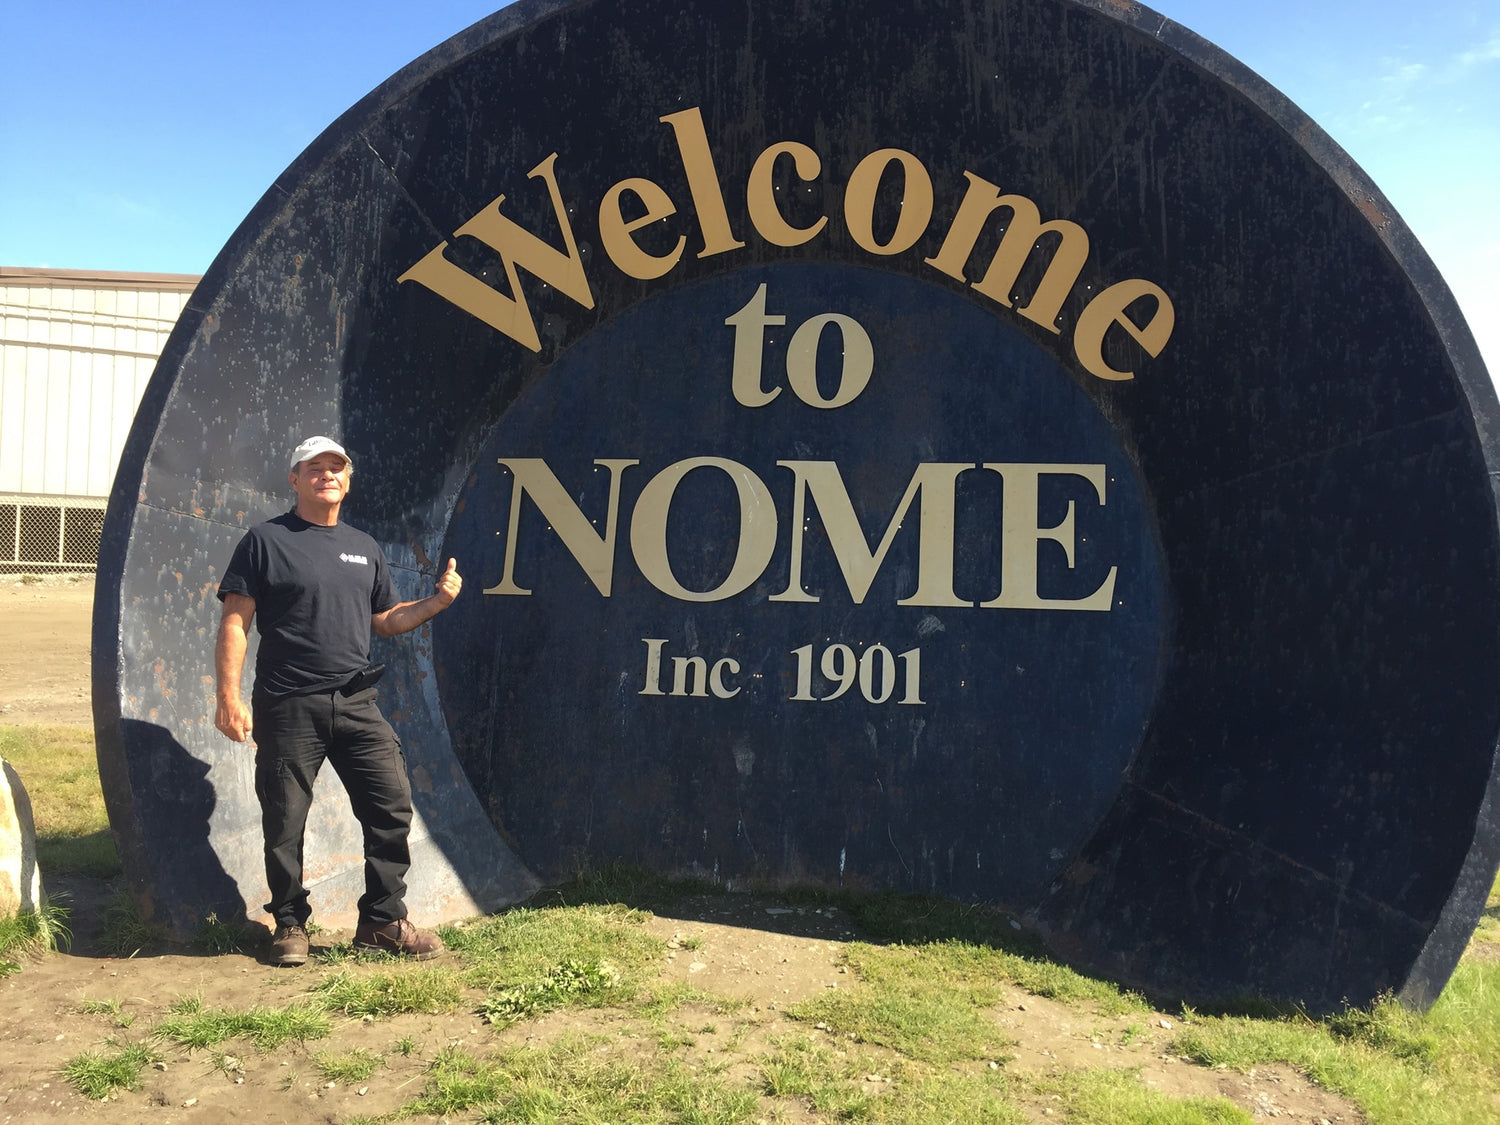 Founder of America's Auction Channel at Welcome to Nome Alaska sign.